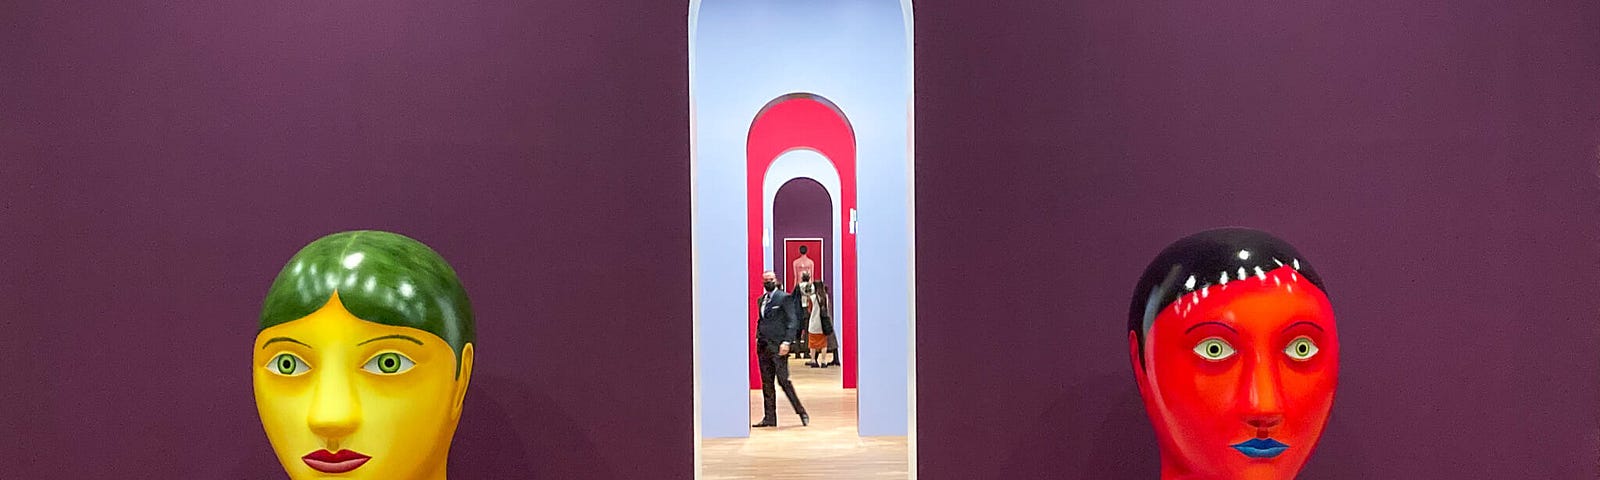 Art installation showing a large yellow head and a large red head on opposite sides of a narrow doorway in a purple painted wall